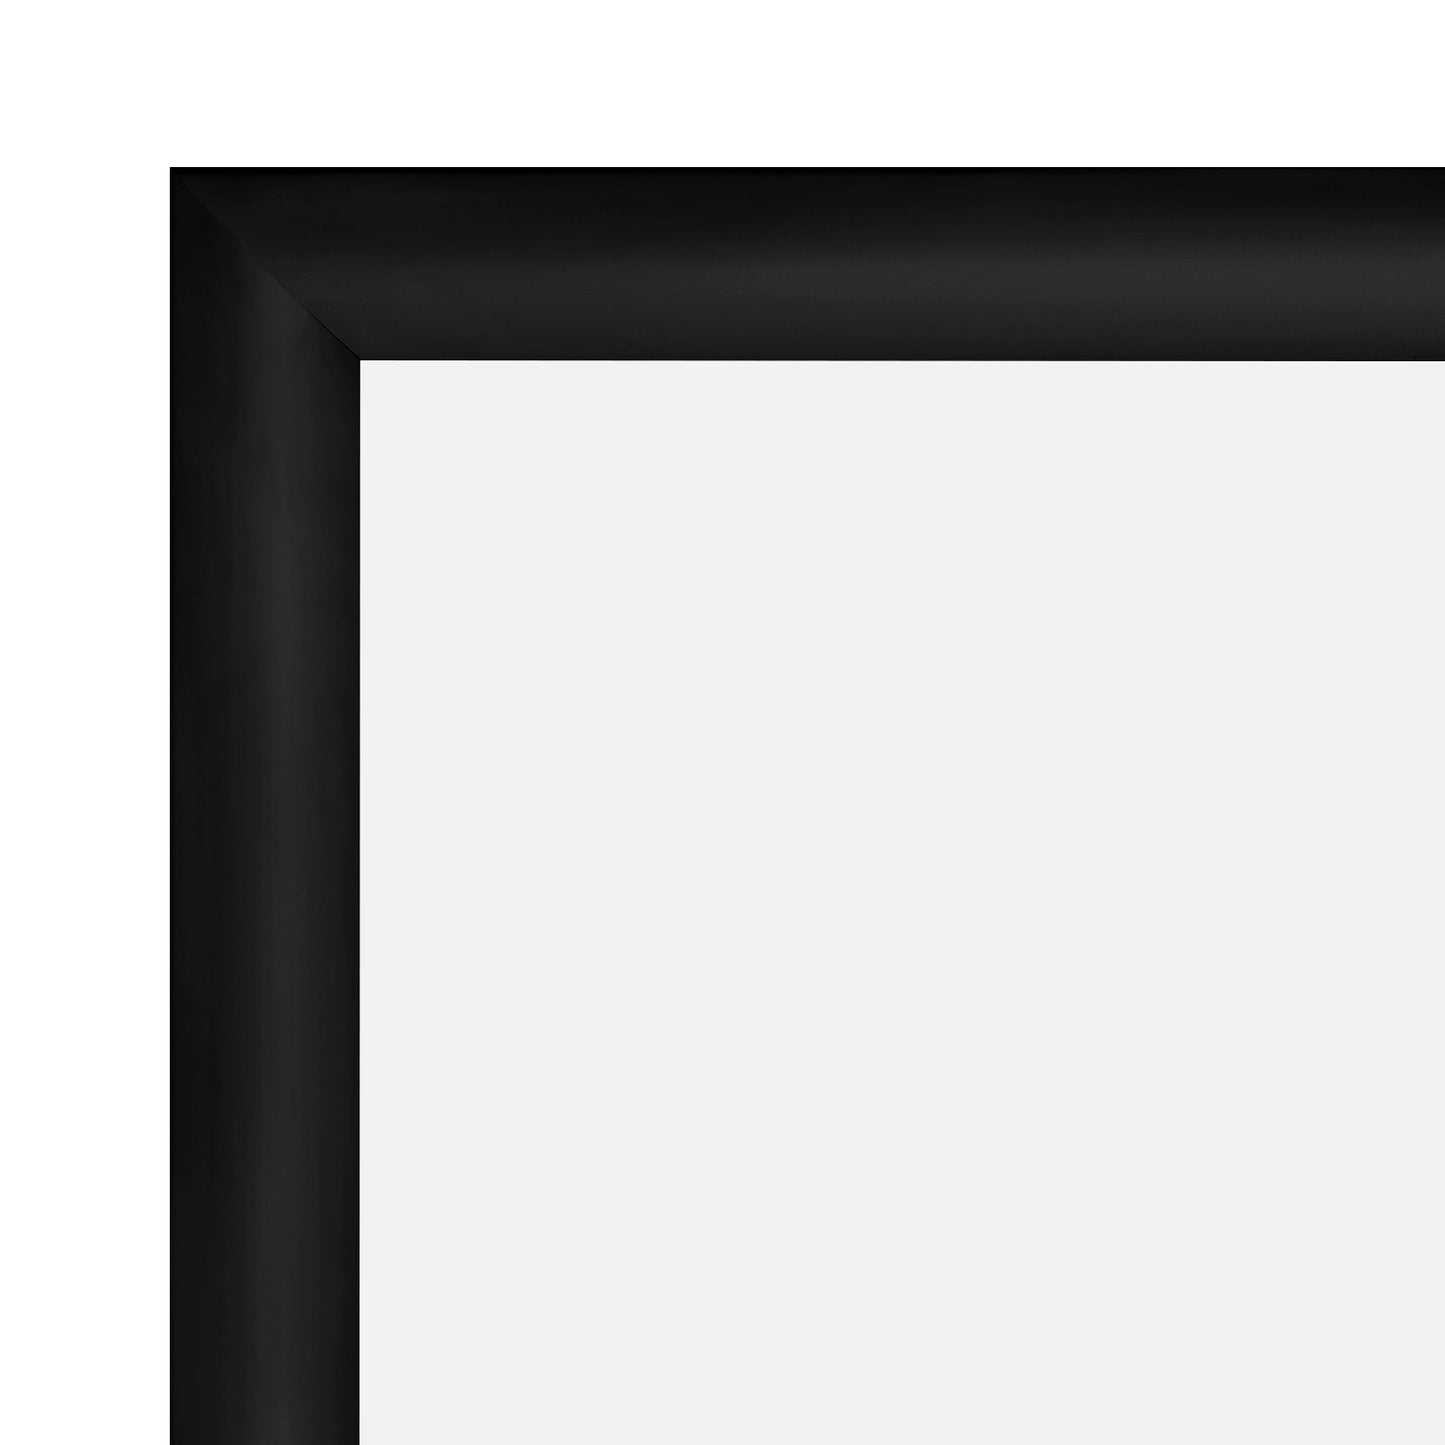 Load image into Gallery viewer, 36x48 Black SnapeZo® Snap Frame - 1.2&amp;quot; Profile - Snap Frames Direct
